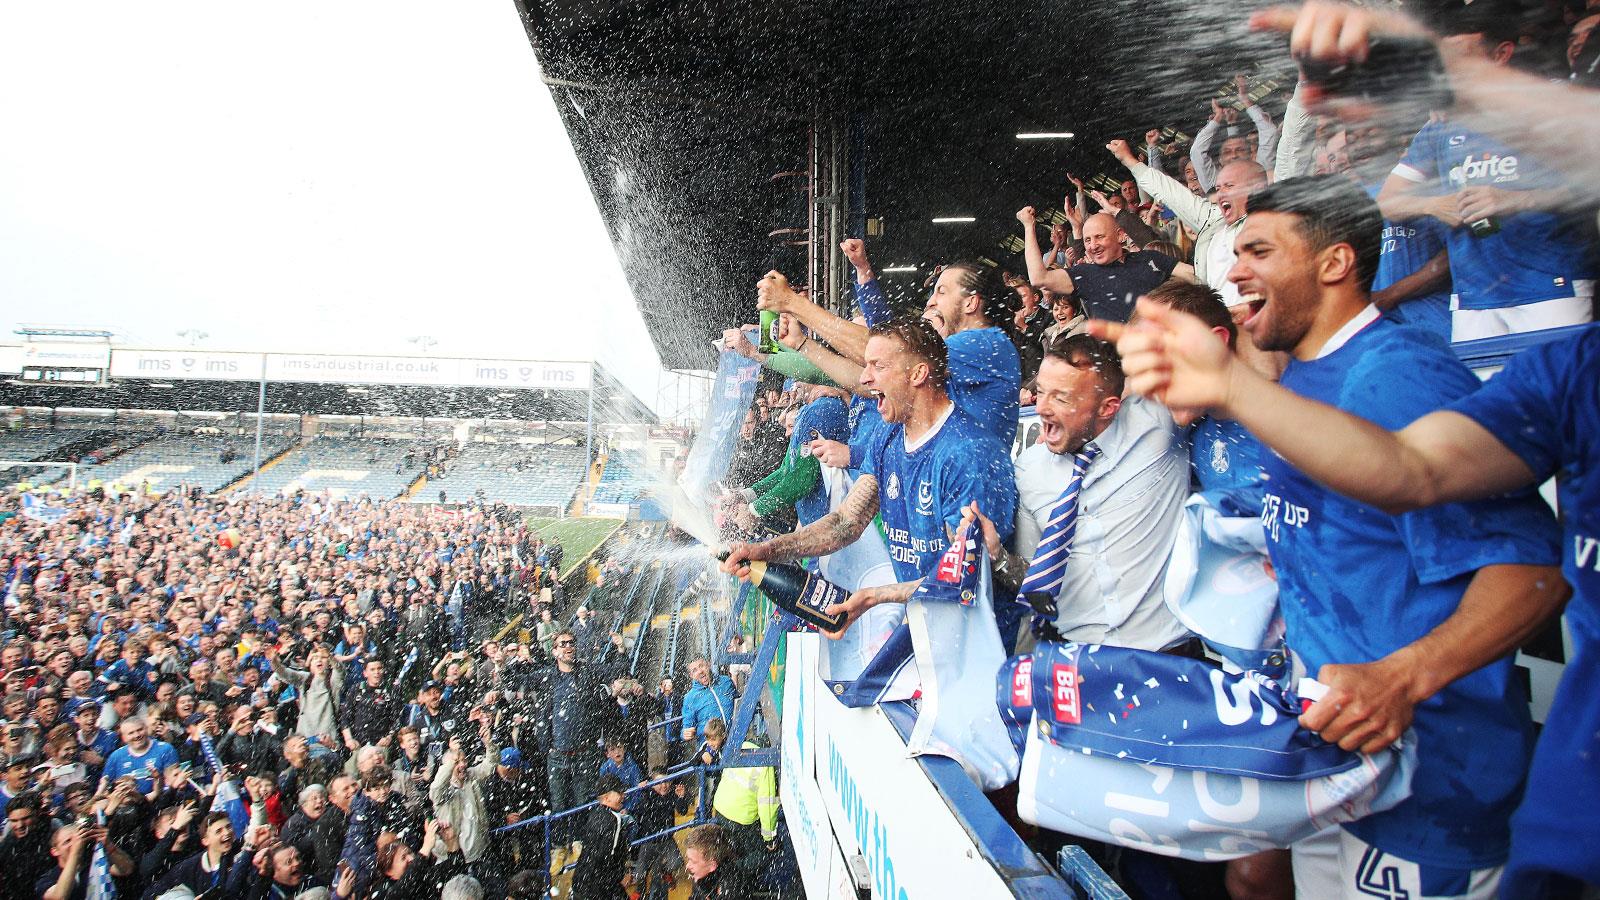 WE ARE THE CHAMPIONS - News - Portsmouth